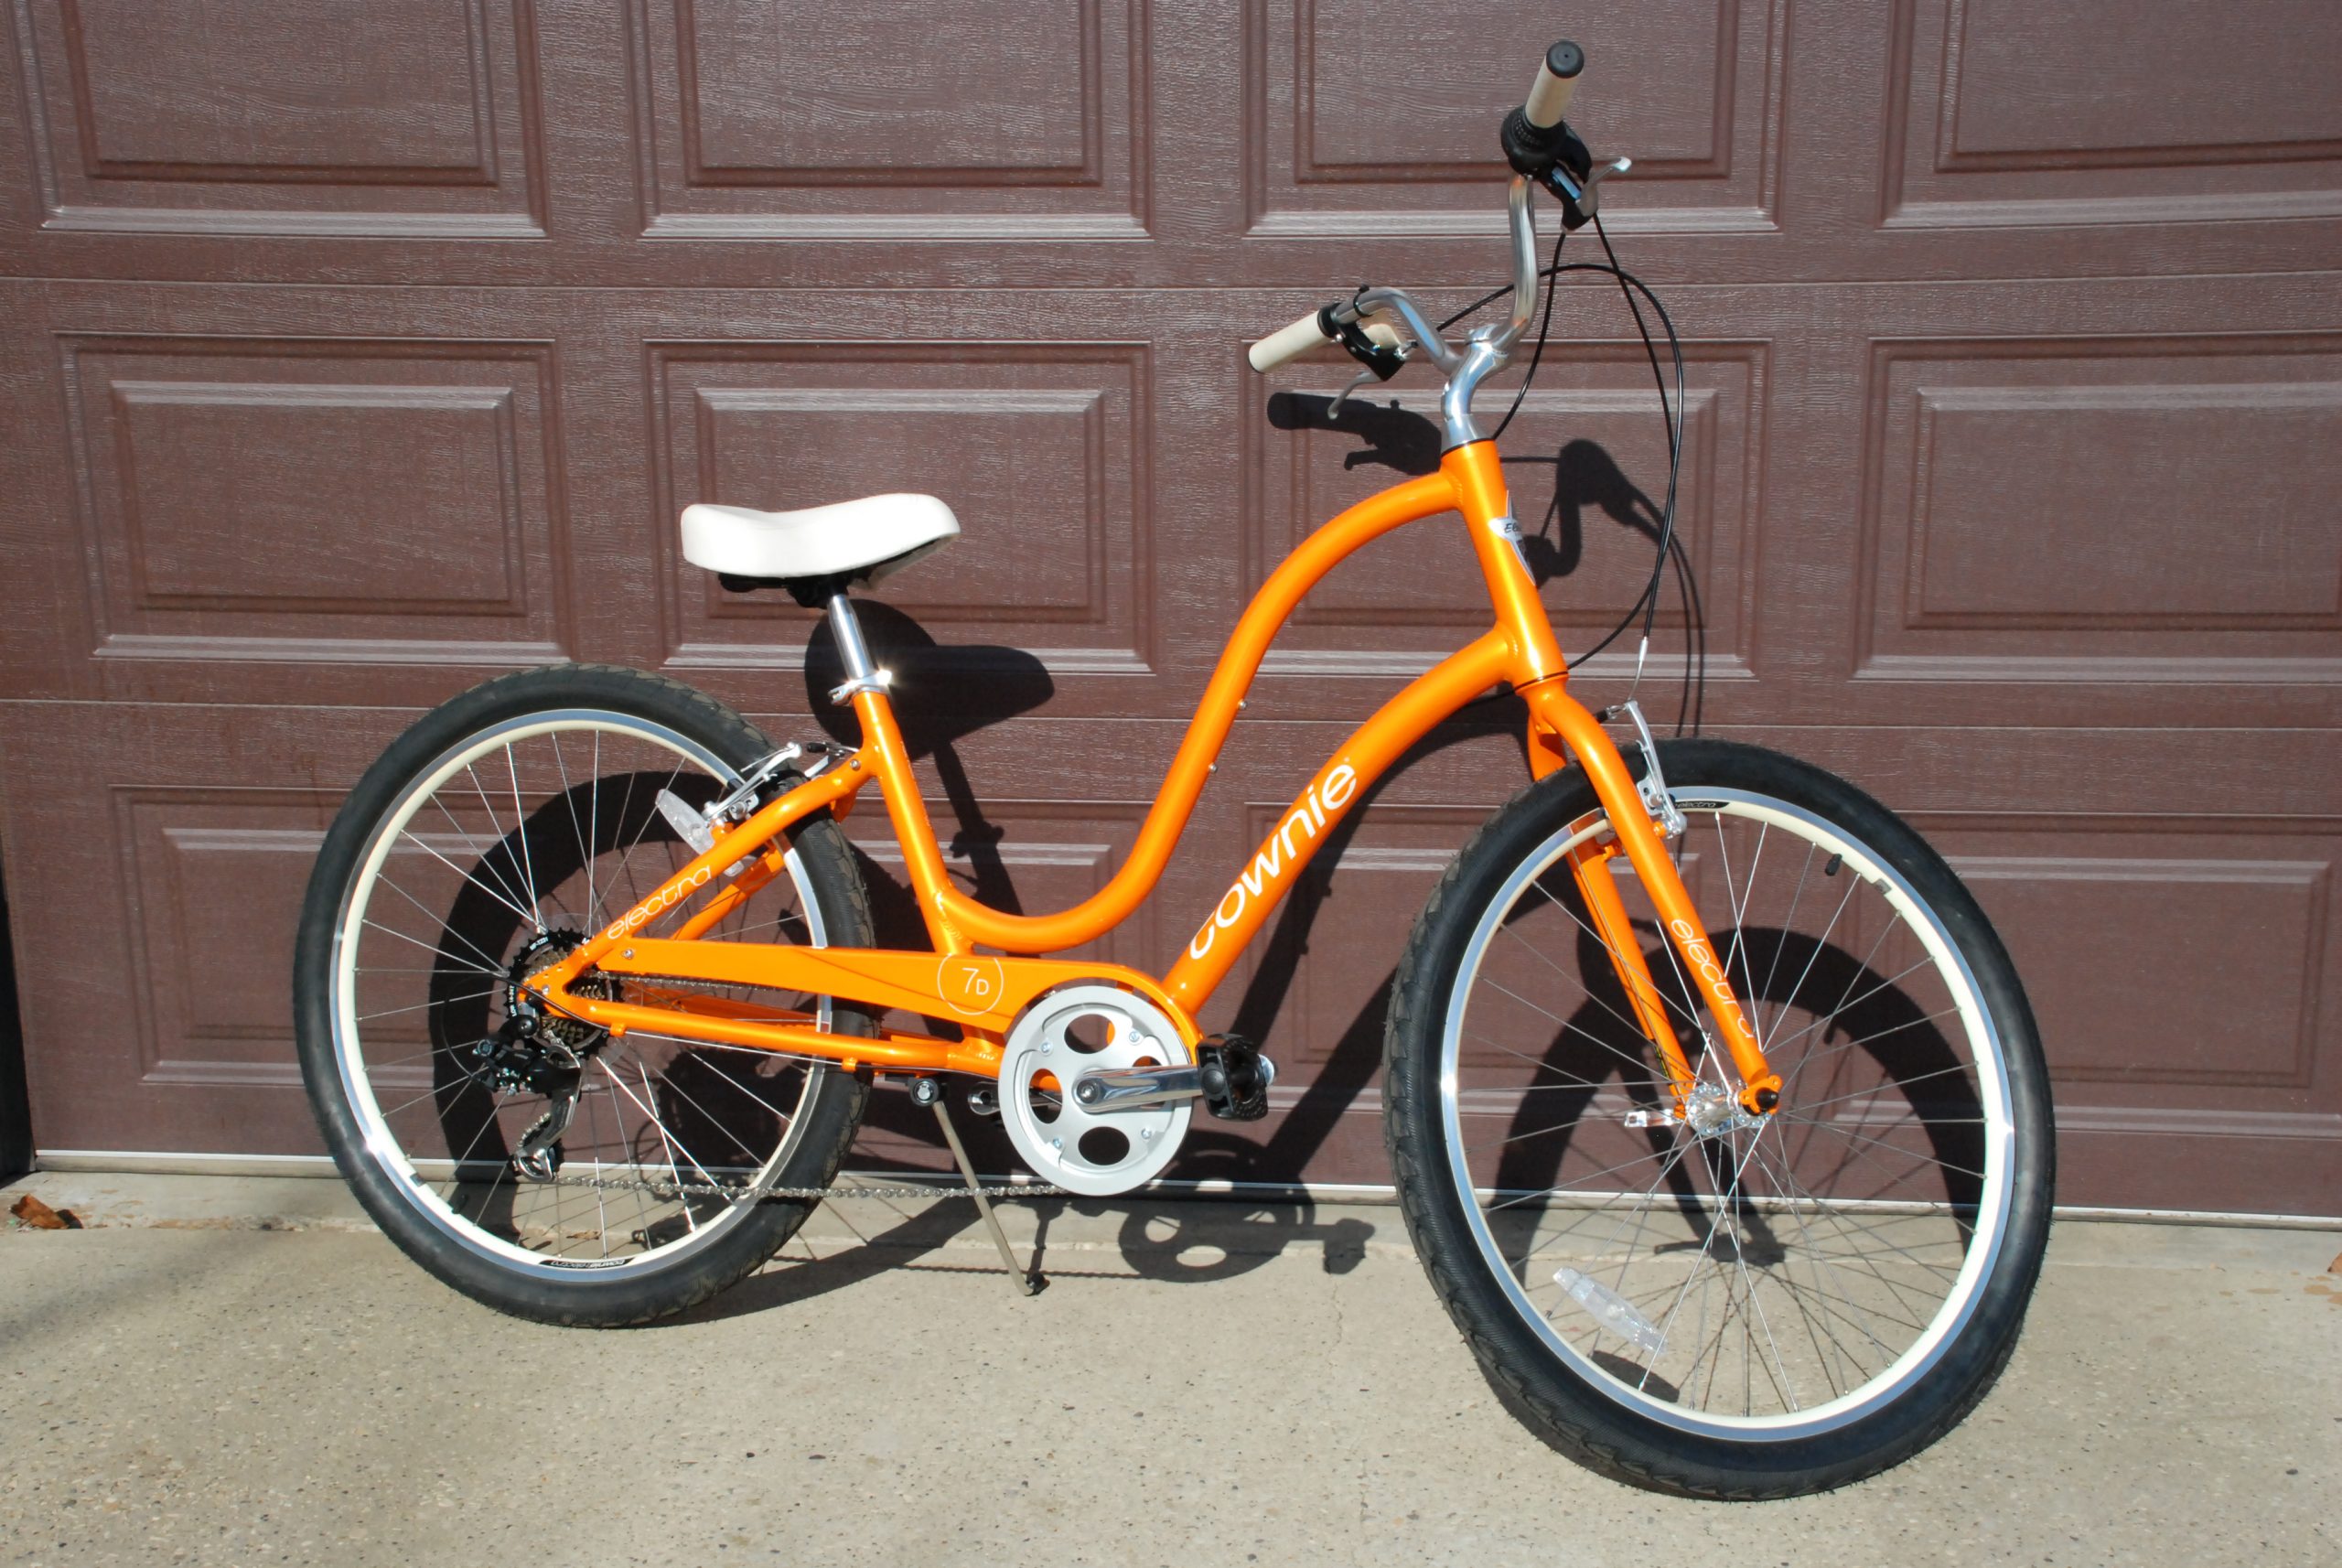 Win this bike by signing up for Park Power during the month of April 2015